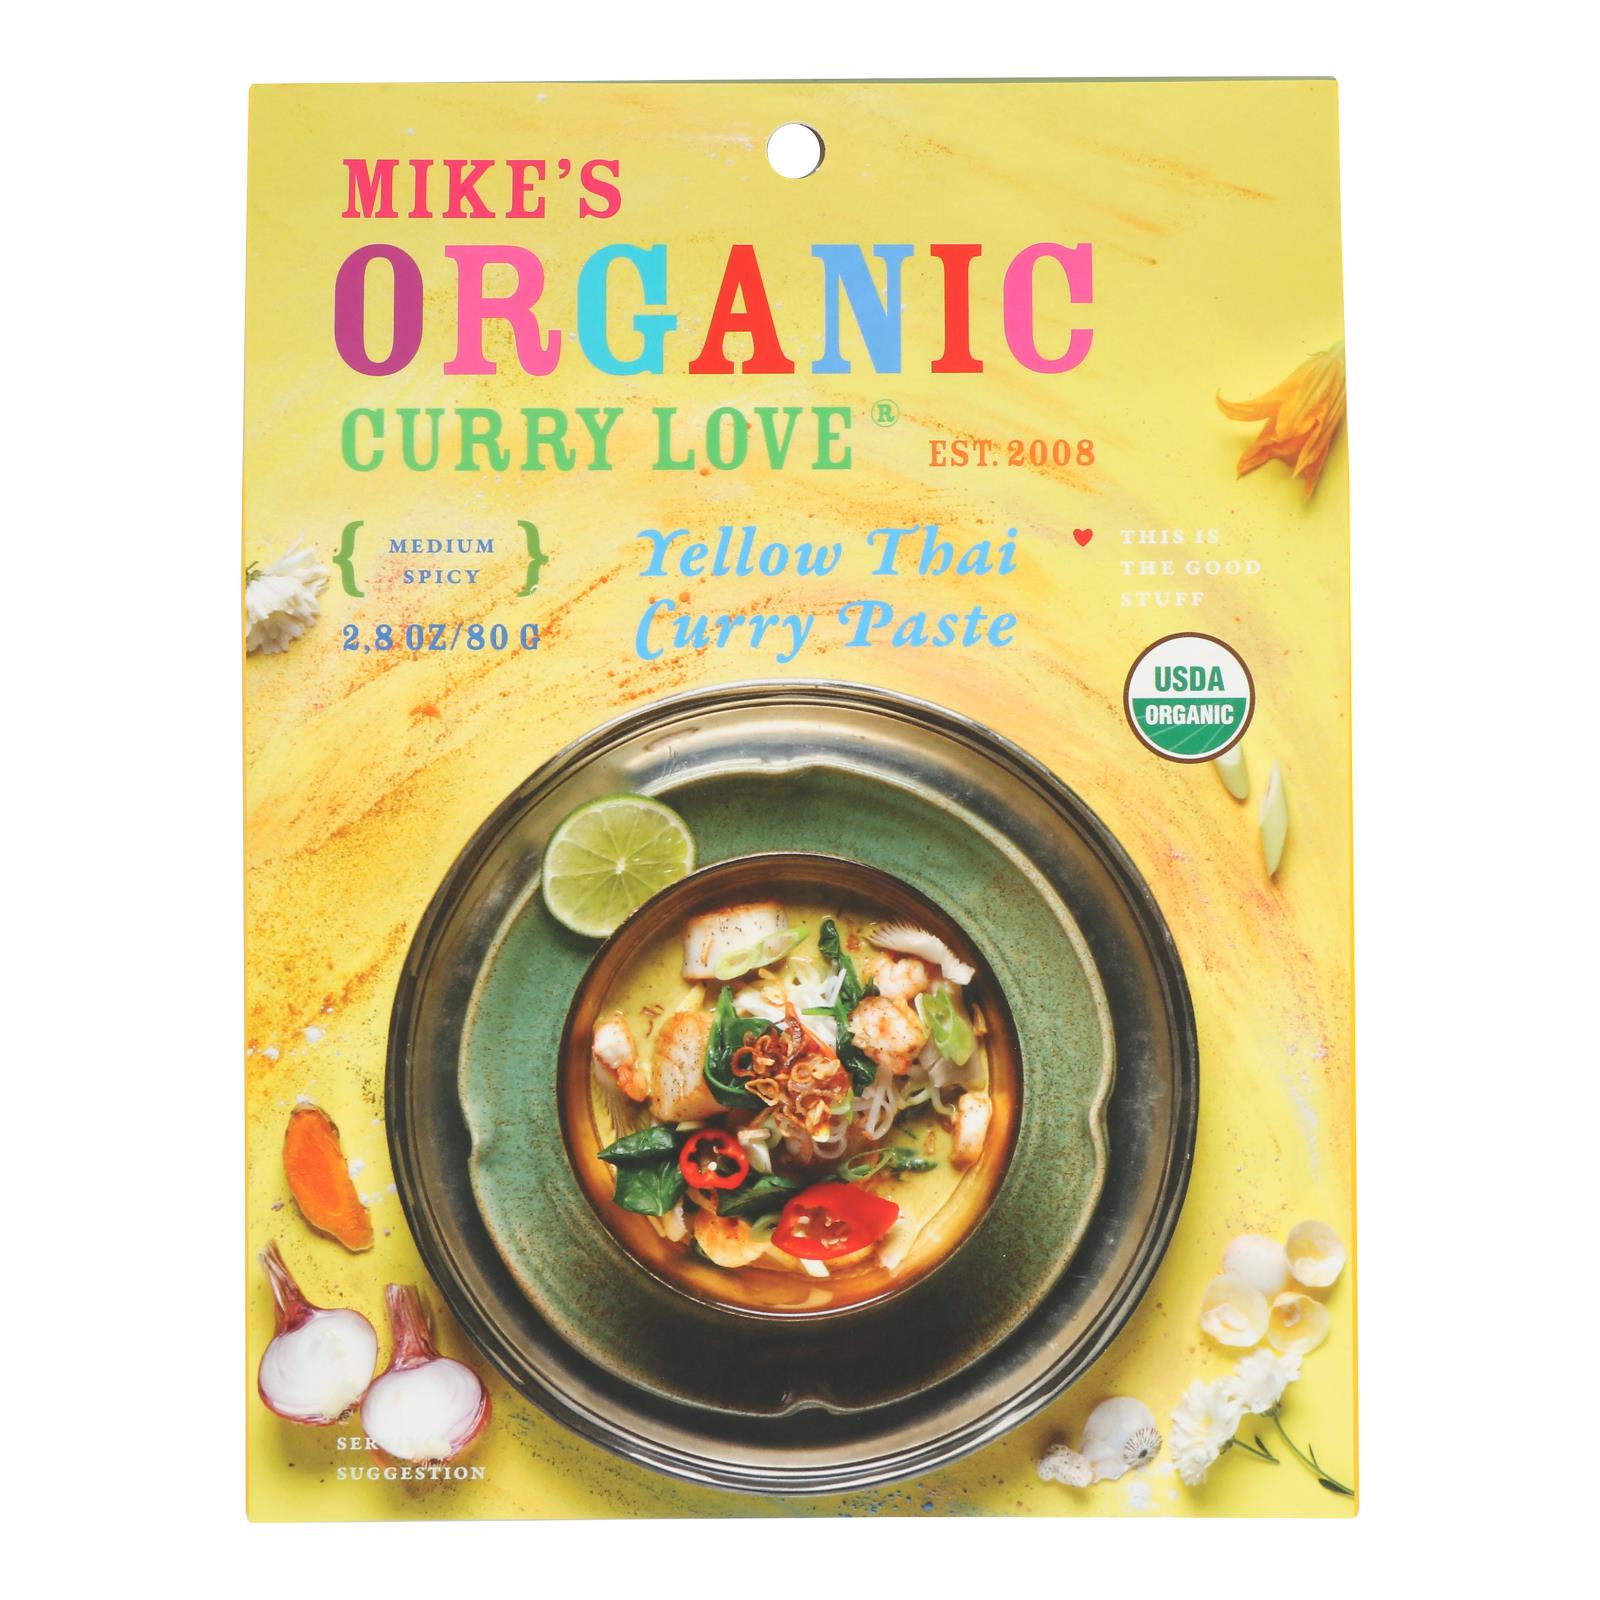 Mike's Organic Curry Love - Organic Curry Paste - Yellow Thai - Case Of 6 - 2.8 Oz.